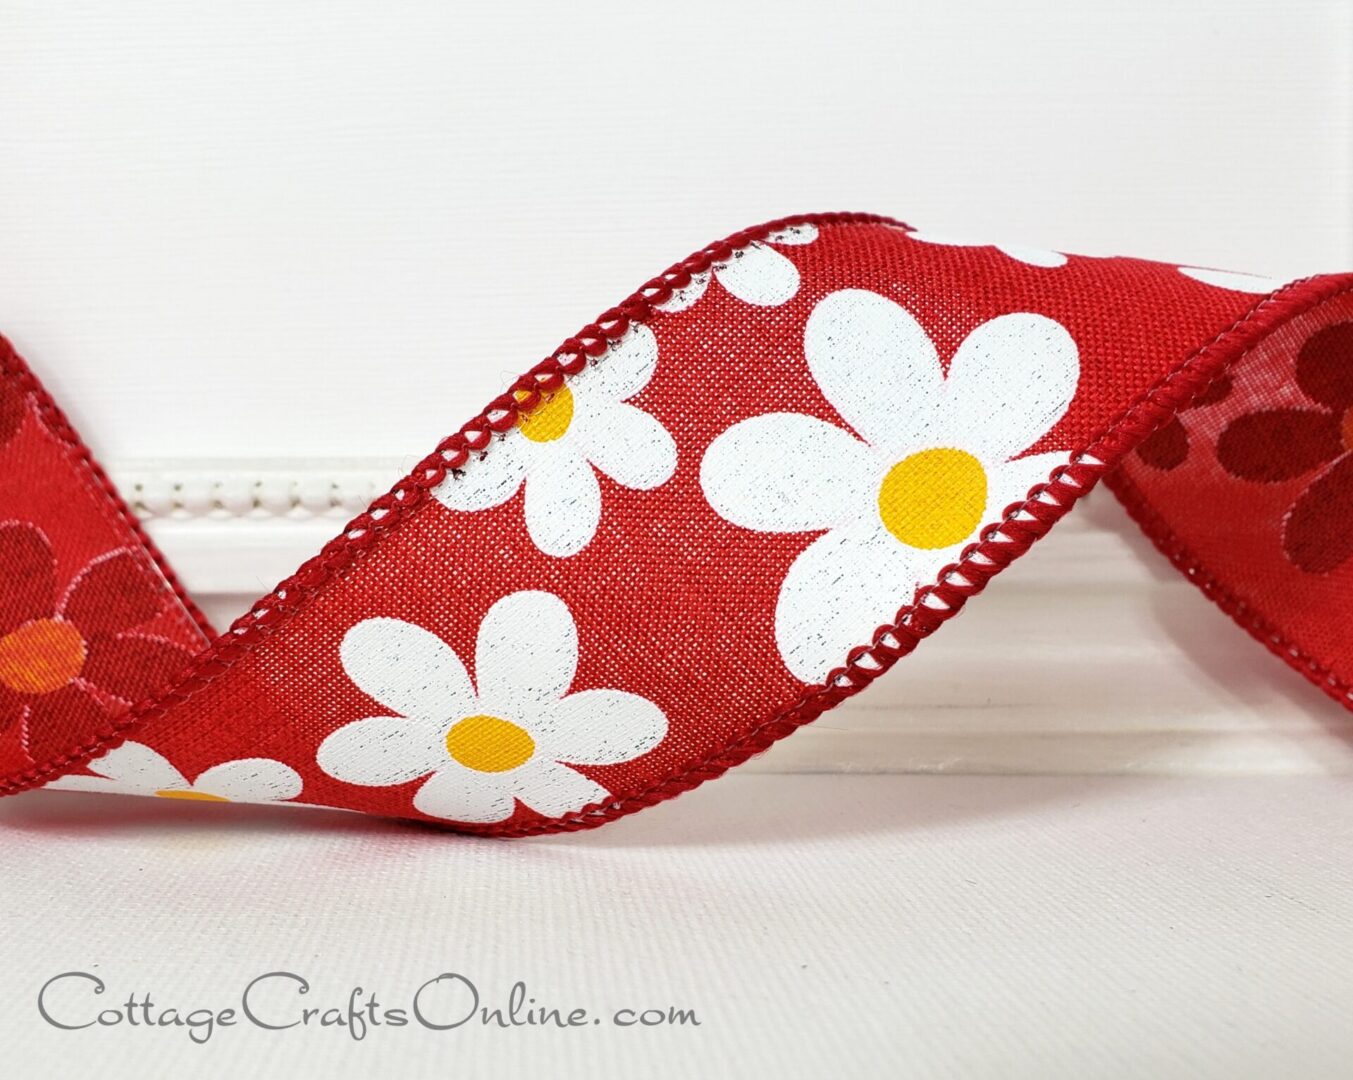 Pop daisies on red 1.5" wide wired ribbon from the Etsy shop of Cottage Crafts Online.